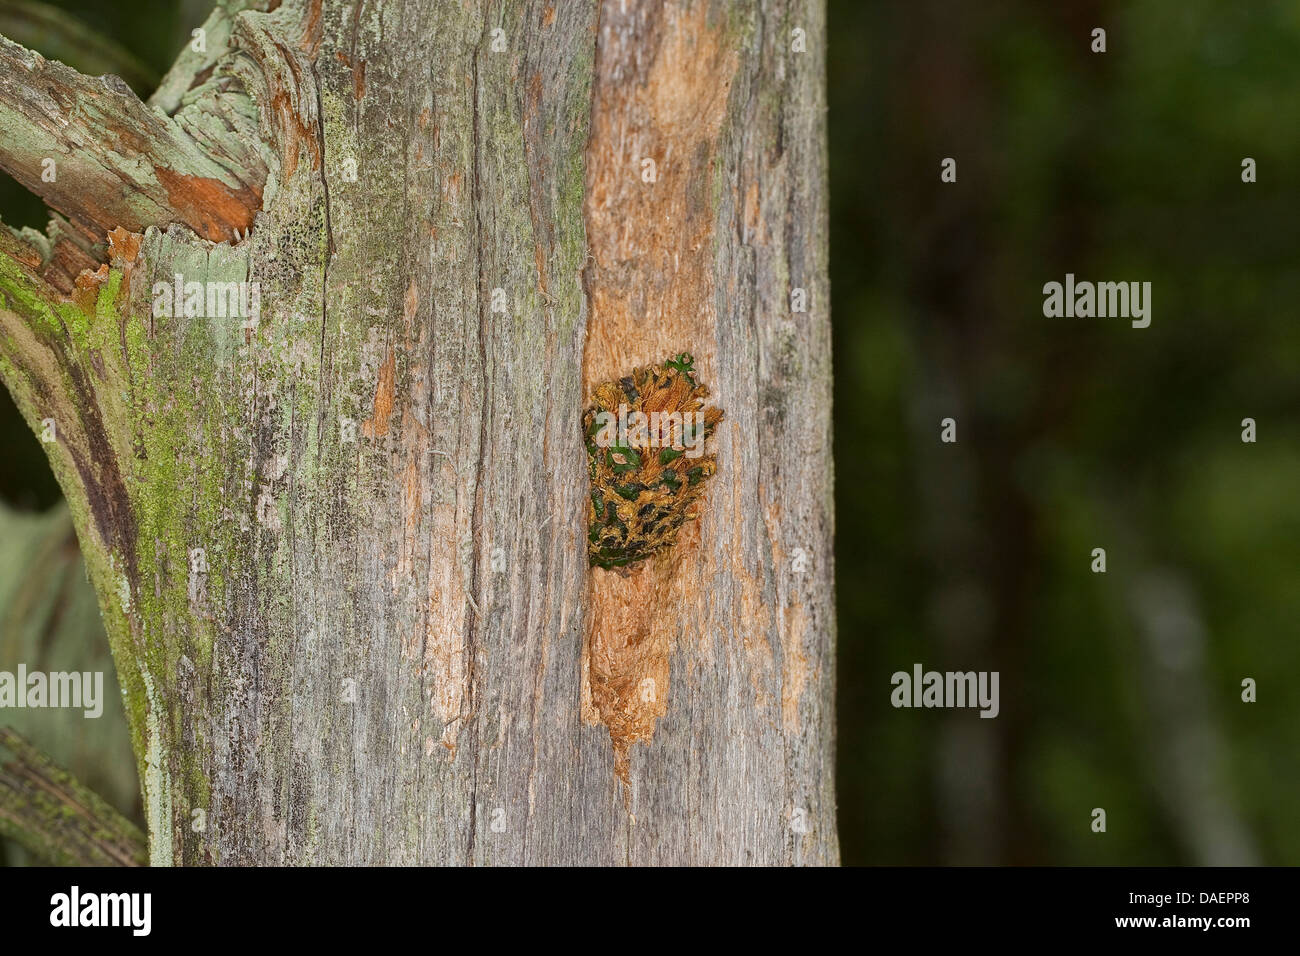 seed-cracking sites of a woodpecker at a tree trunk, Germany Stock Photo